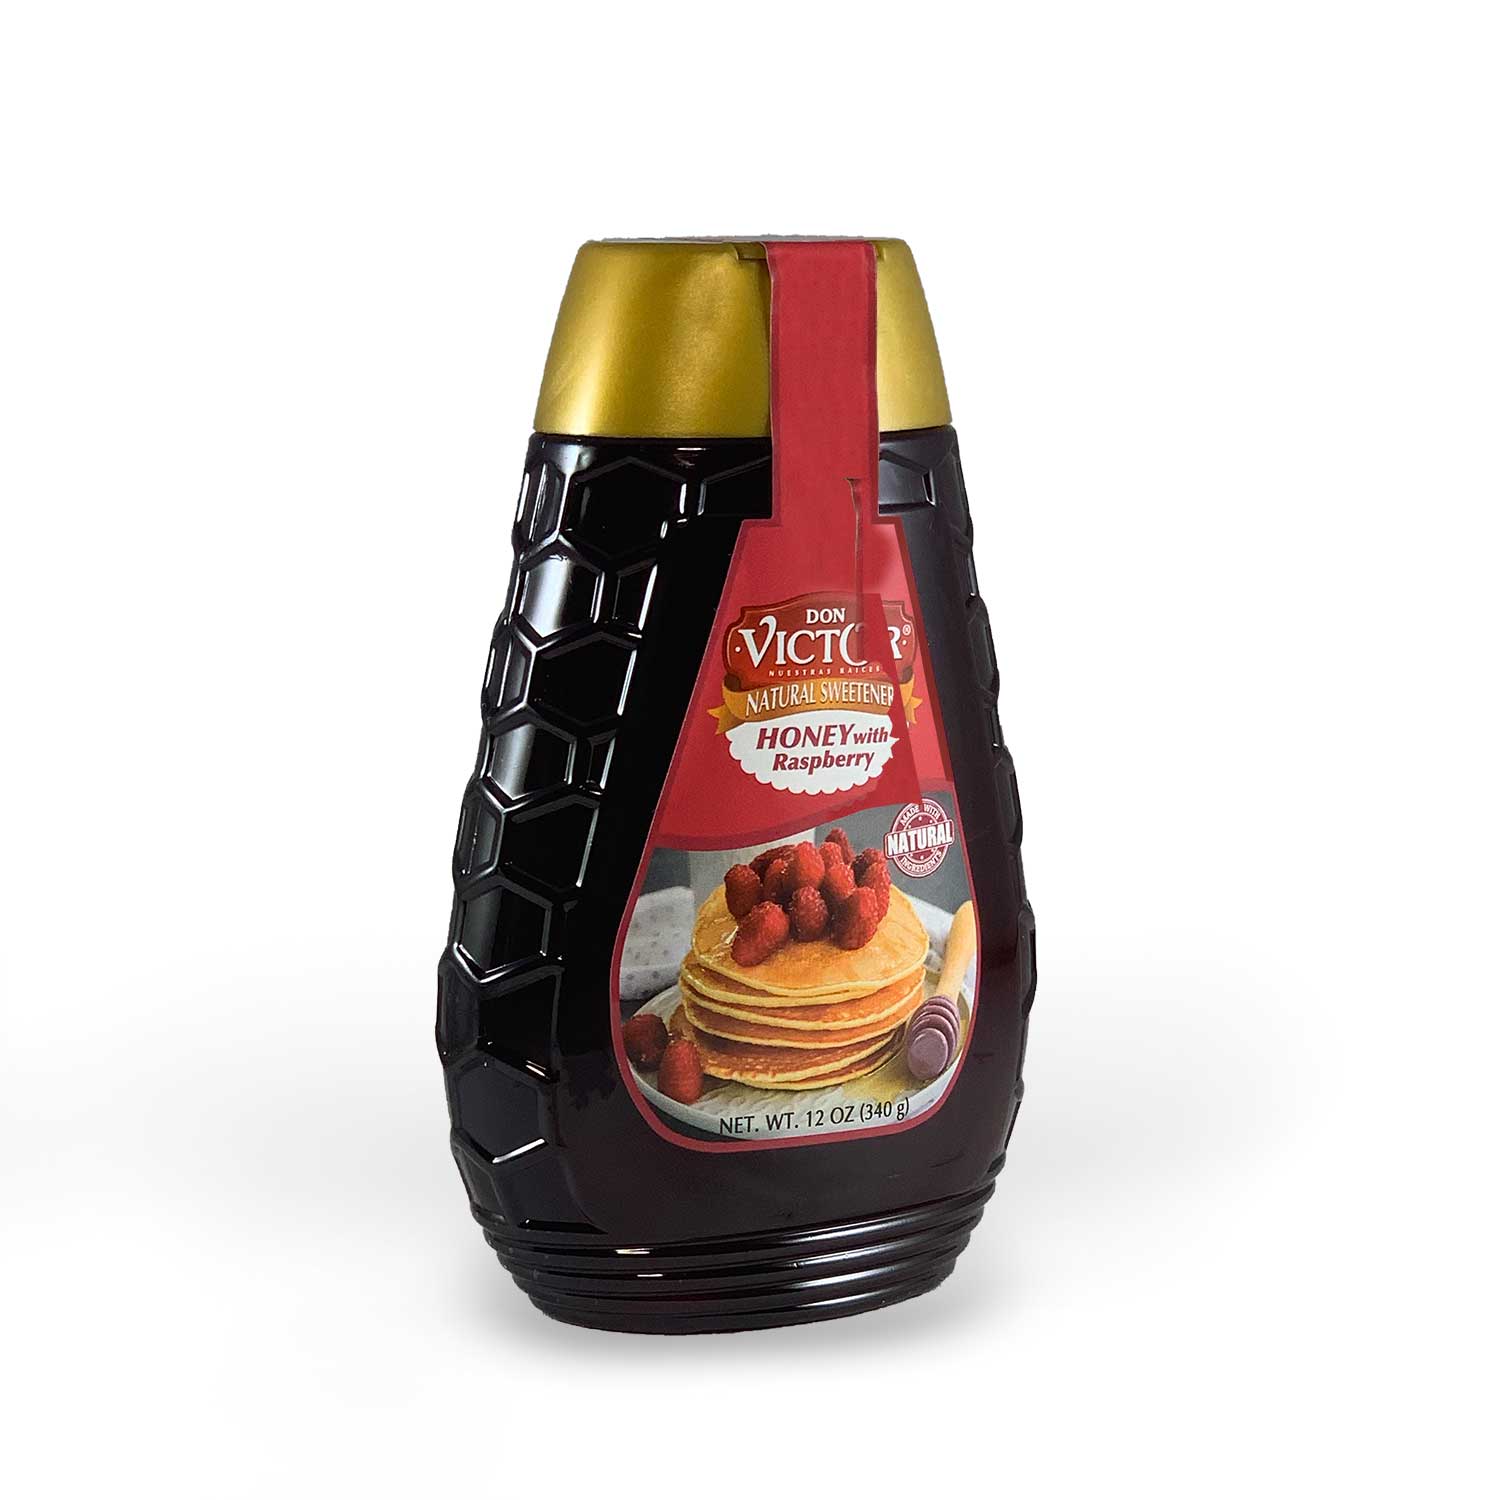 Bottle of Don Victor's Honey with Raspberry, perfect for topping cheesecake, pancakes, or sweetening hot tea.